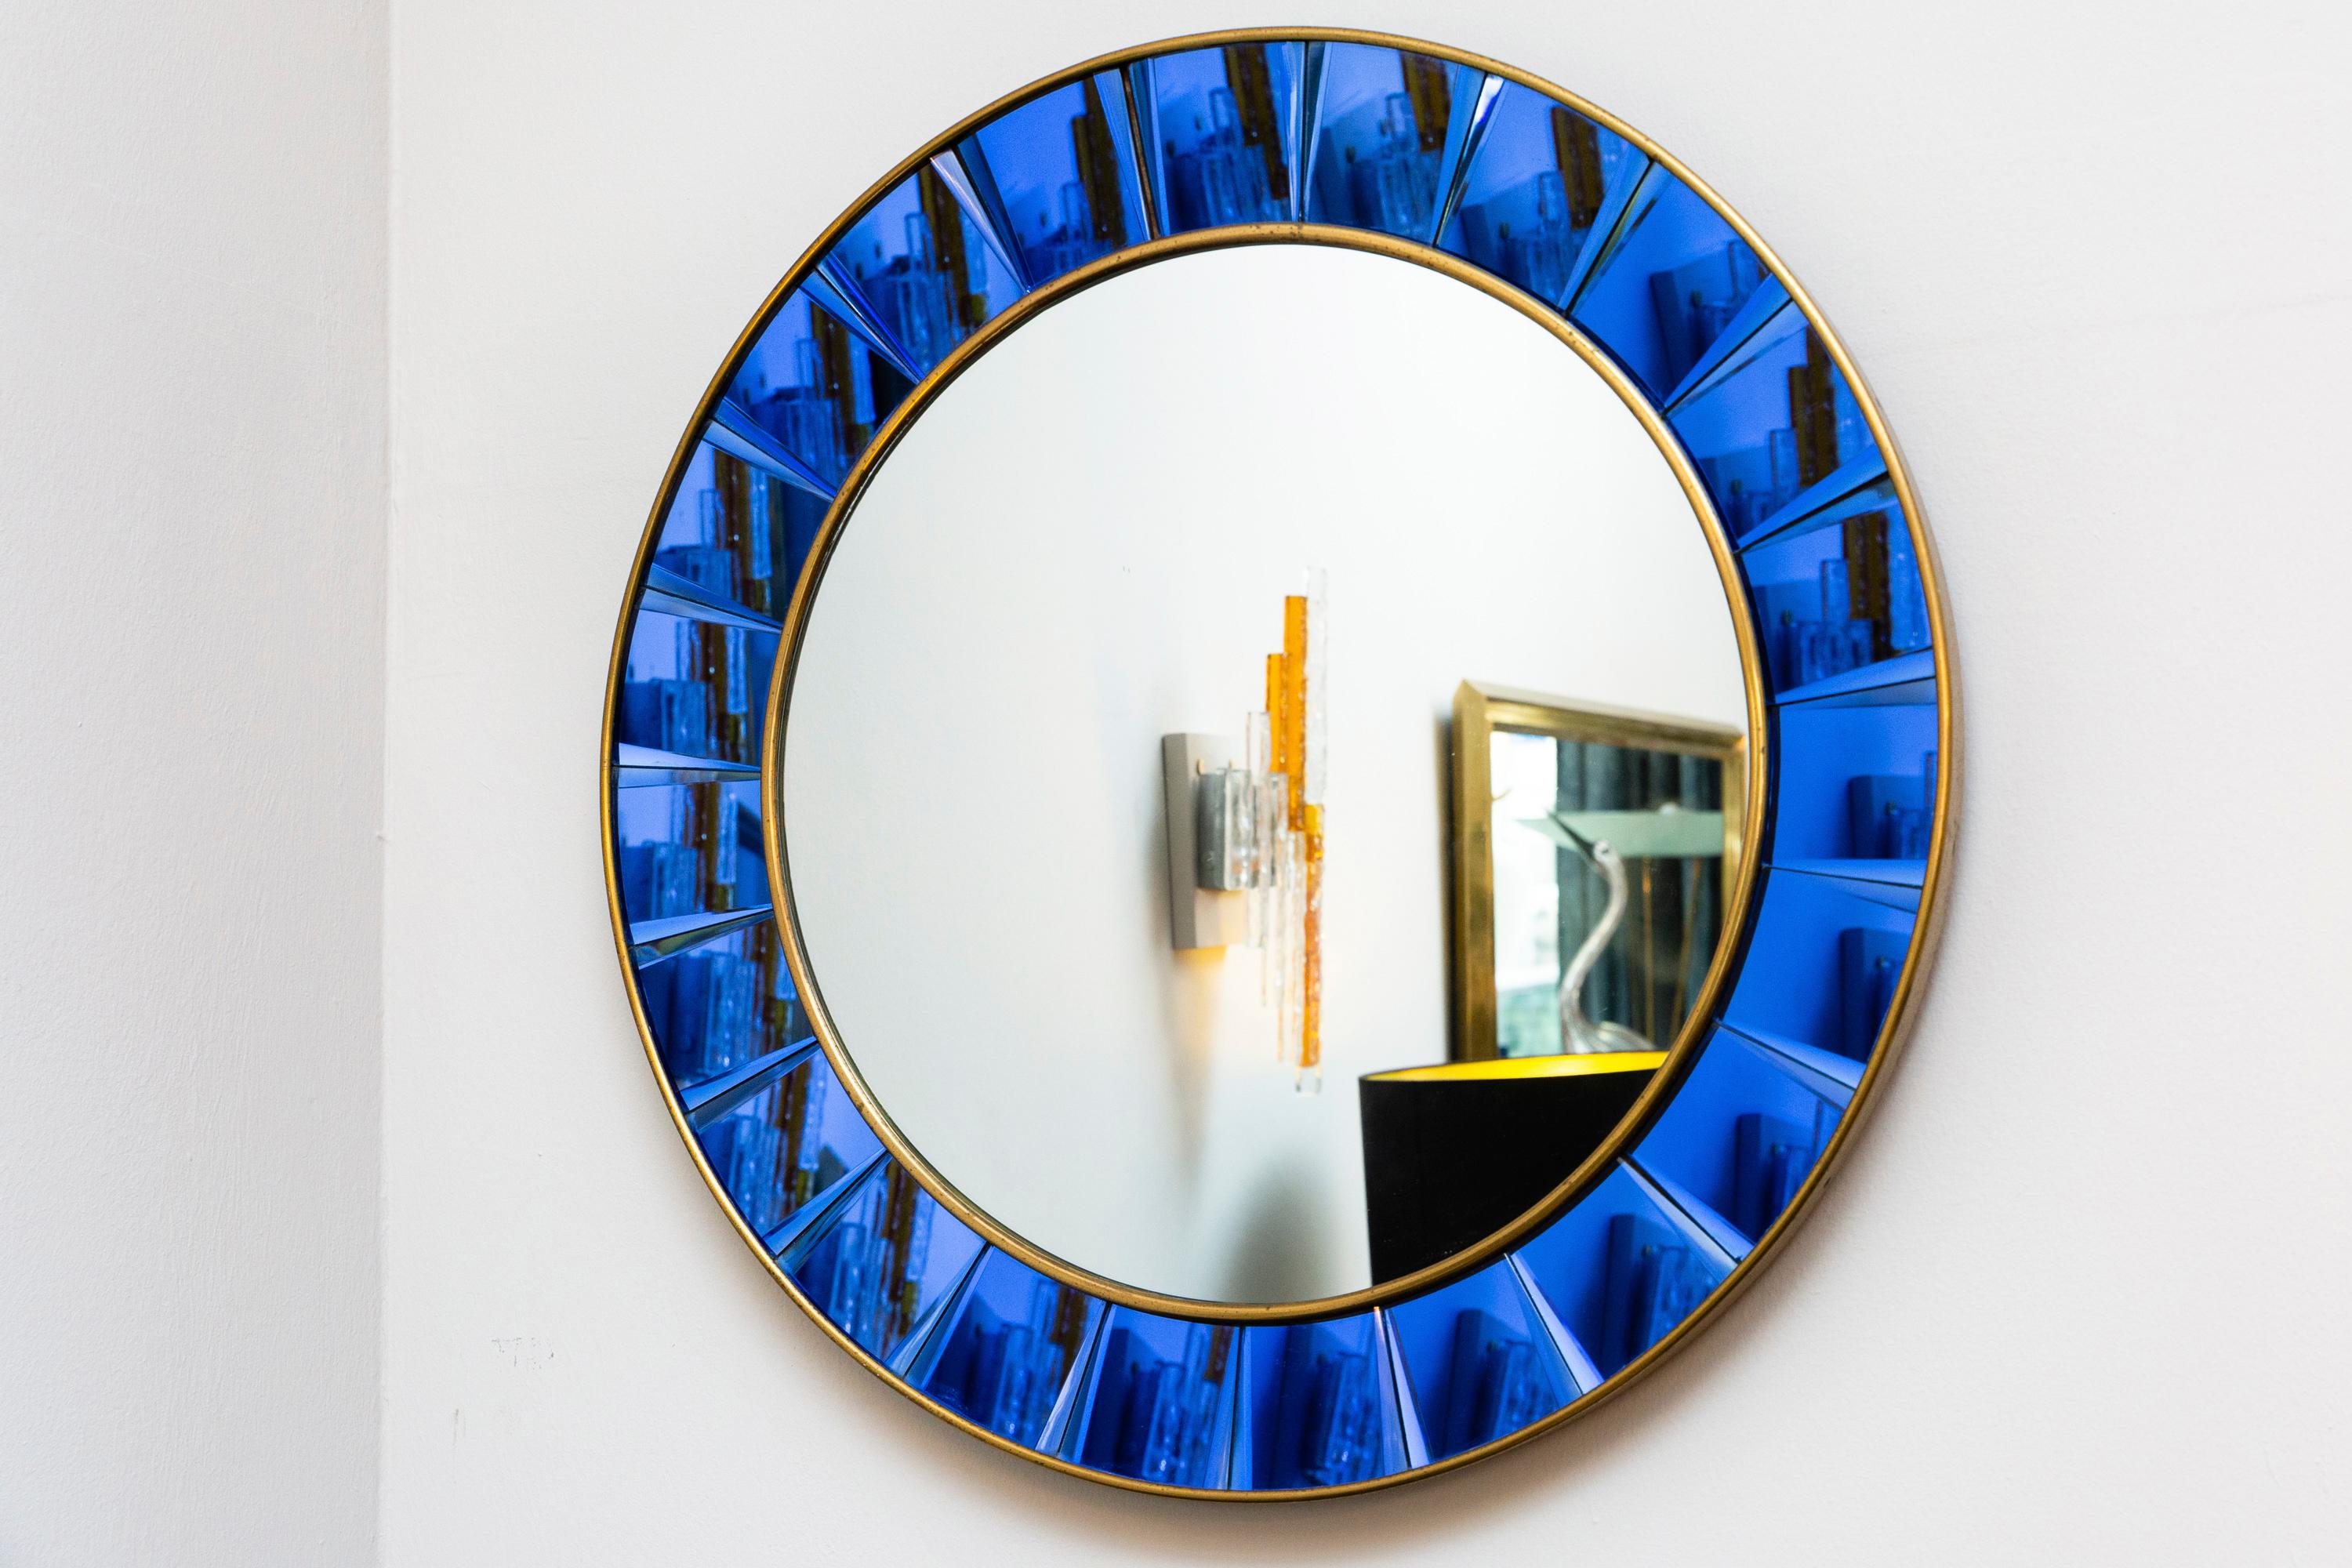 Amazing crystal art wall mirror, Italy, circa 1955, blue shaped mirror glass framed in brass and mirror glass. Diameter 75 cm.
Very good condition without damage, slide patina on the brass frame.